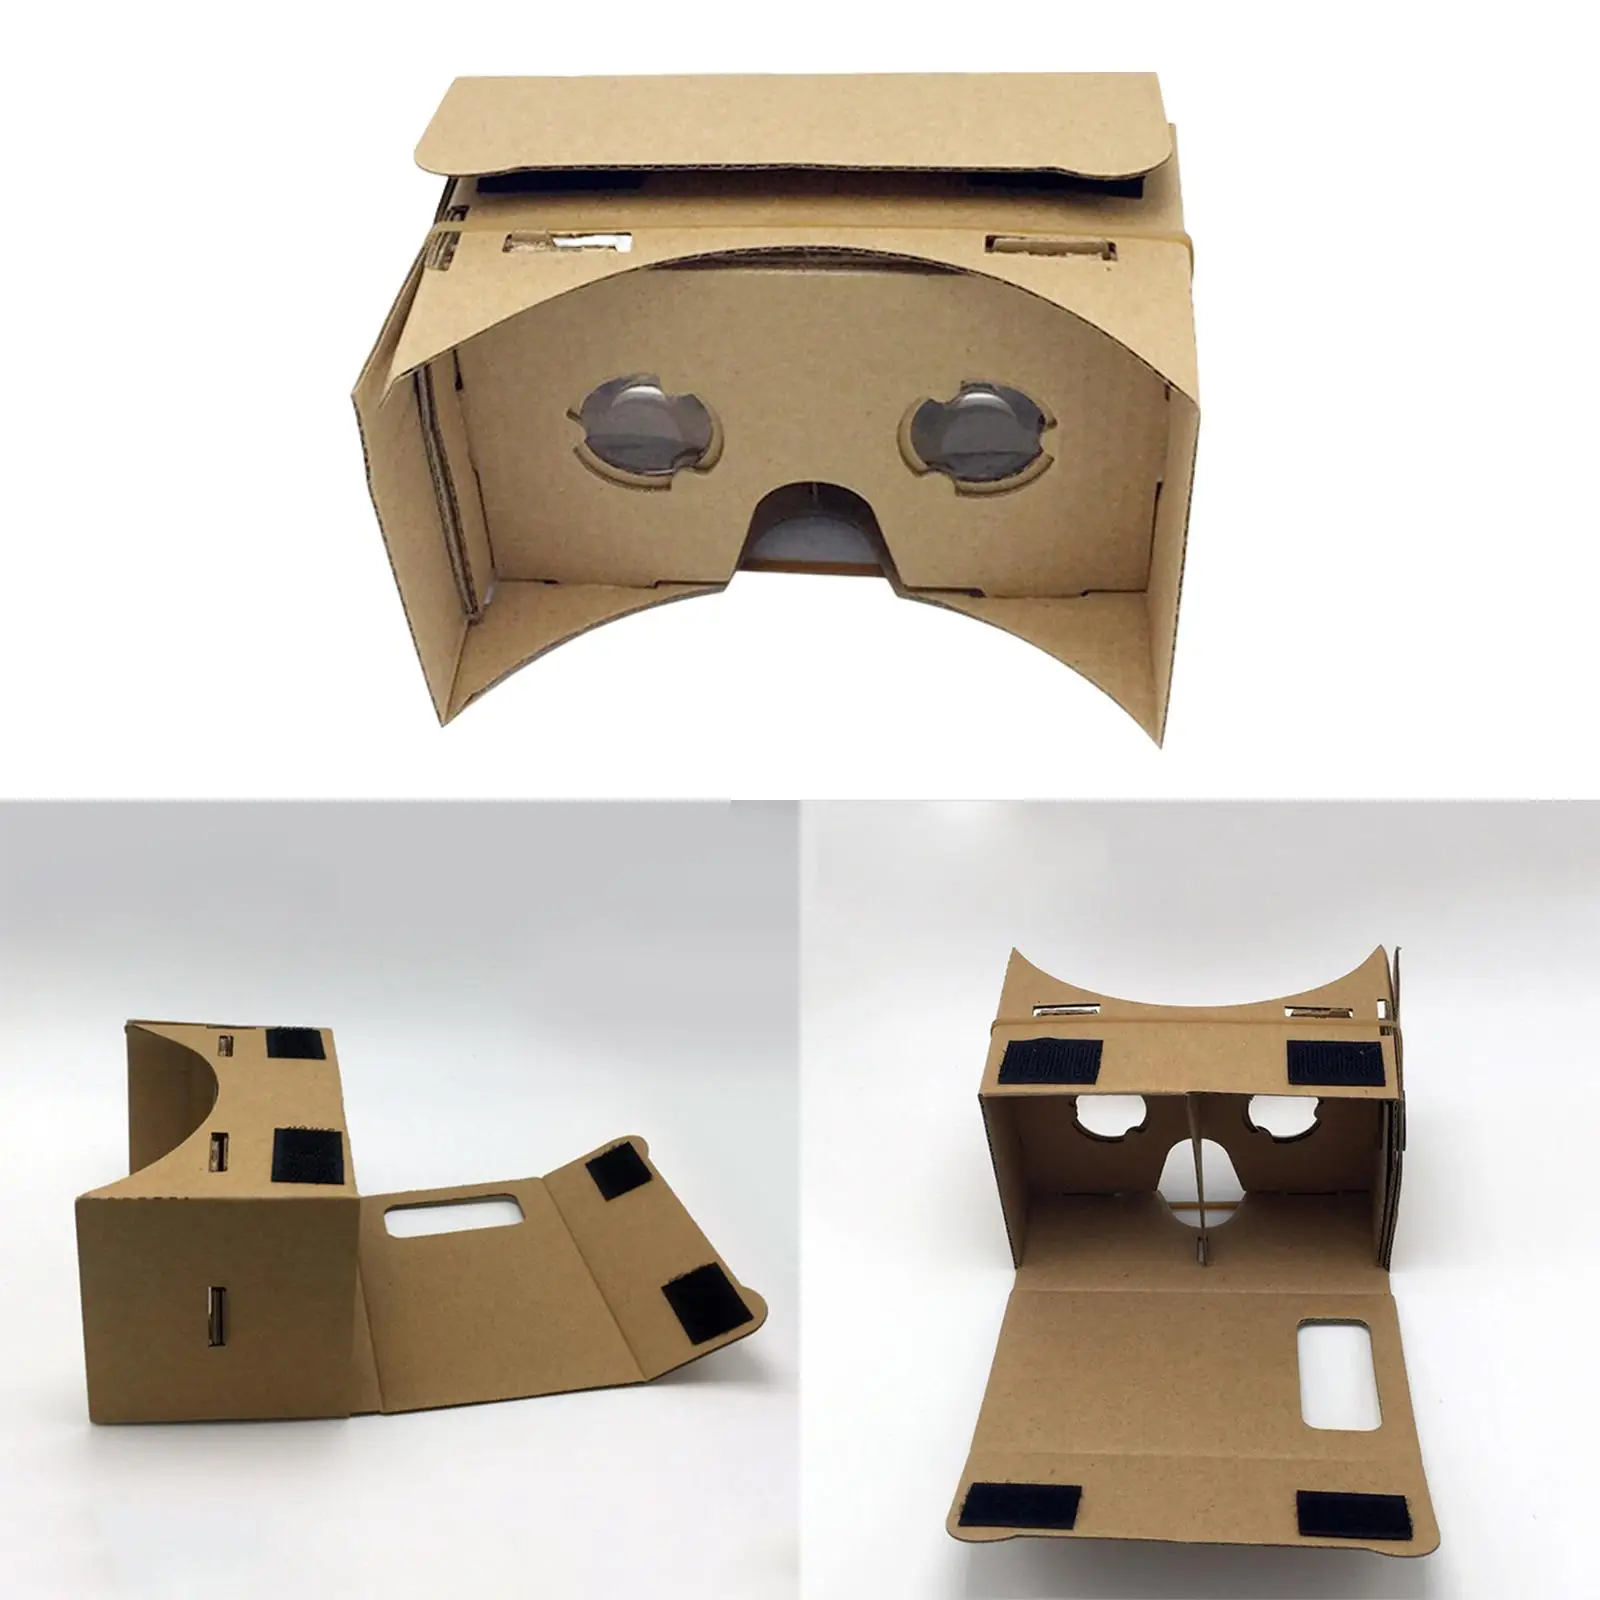 V1 DIY Cardboard for Google VR Case Kit Fits All 3-6 inch Smartphones Comfortable Compact Brown ,Lots of Content to Explore